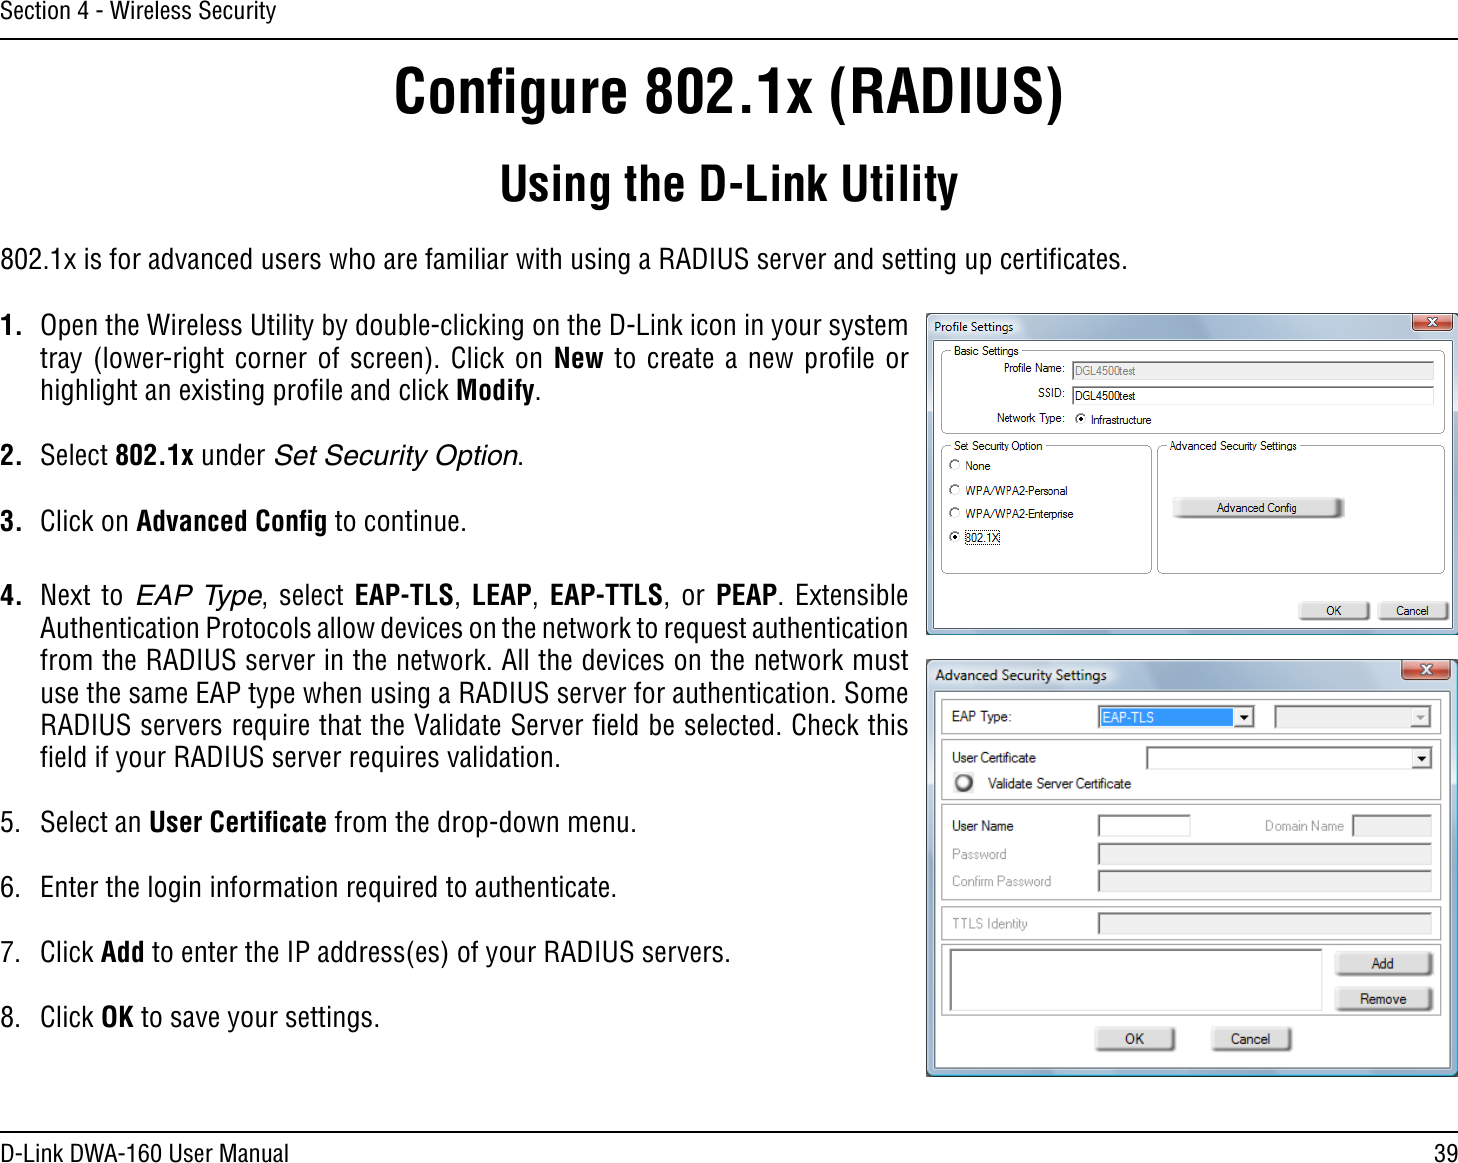 39D-Link DWA-160 User ManualSection 4 - Wireless SecurityConﬁgure 802.1x (RADIUS)Using the D-Link Utility802.1x is for advanced users who are familiar with using a RADIUS server and setting up certiﬁcates.1.  Open the Wireless Utility by double-clicking on the D-Link icon in your system tray (lower-right corner of screen). Click on New to create a new proﬁle or highlight an existing proﬁle and click Modify. 2. Select 802.1x under Set Security Option.3. Click on Advanced Conﬁg to continue.4. Next to EAP Type, select EAP-TLS,  LEAP,  EAP-TTLS, or PEAP. Extensible Authentication Protocols allow devices on the network to request authentication from the RADIUS server in the network. All the devices on the network must use the same EAP type when using a RADIUS server for authentication. Some RADIUS servers require that the Validate Server ﬁeld be selected. Check this ﬁeld if your RADIUS server requires validation.5. Select an User Certiﬁcate from the drop-down menu.6.  Enter the login information required to authenticate.7. Click Add to enter the IP address(es) of your RADIUS servers.8. Click OK to save your settings.